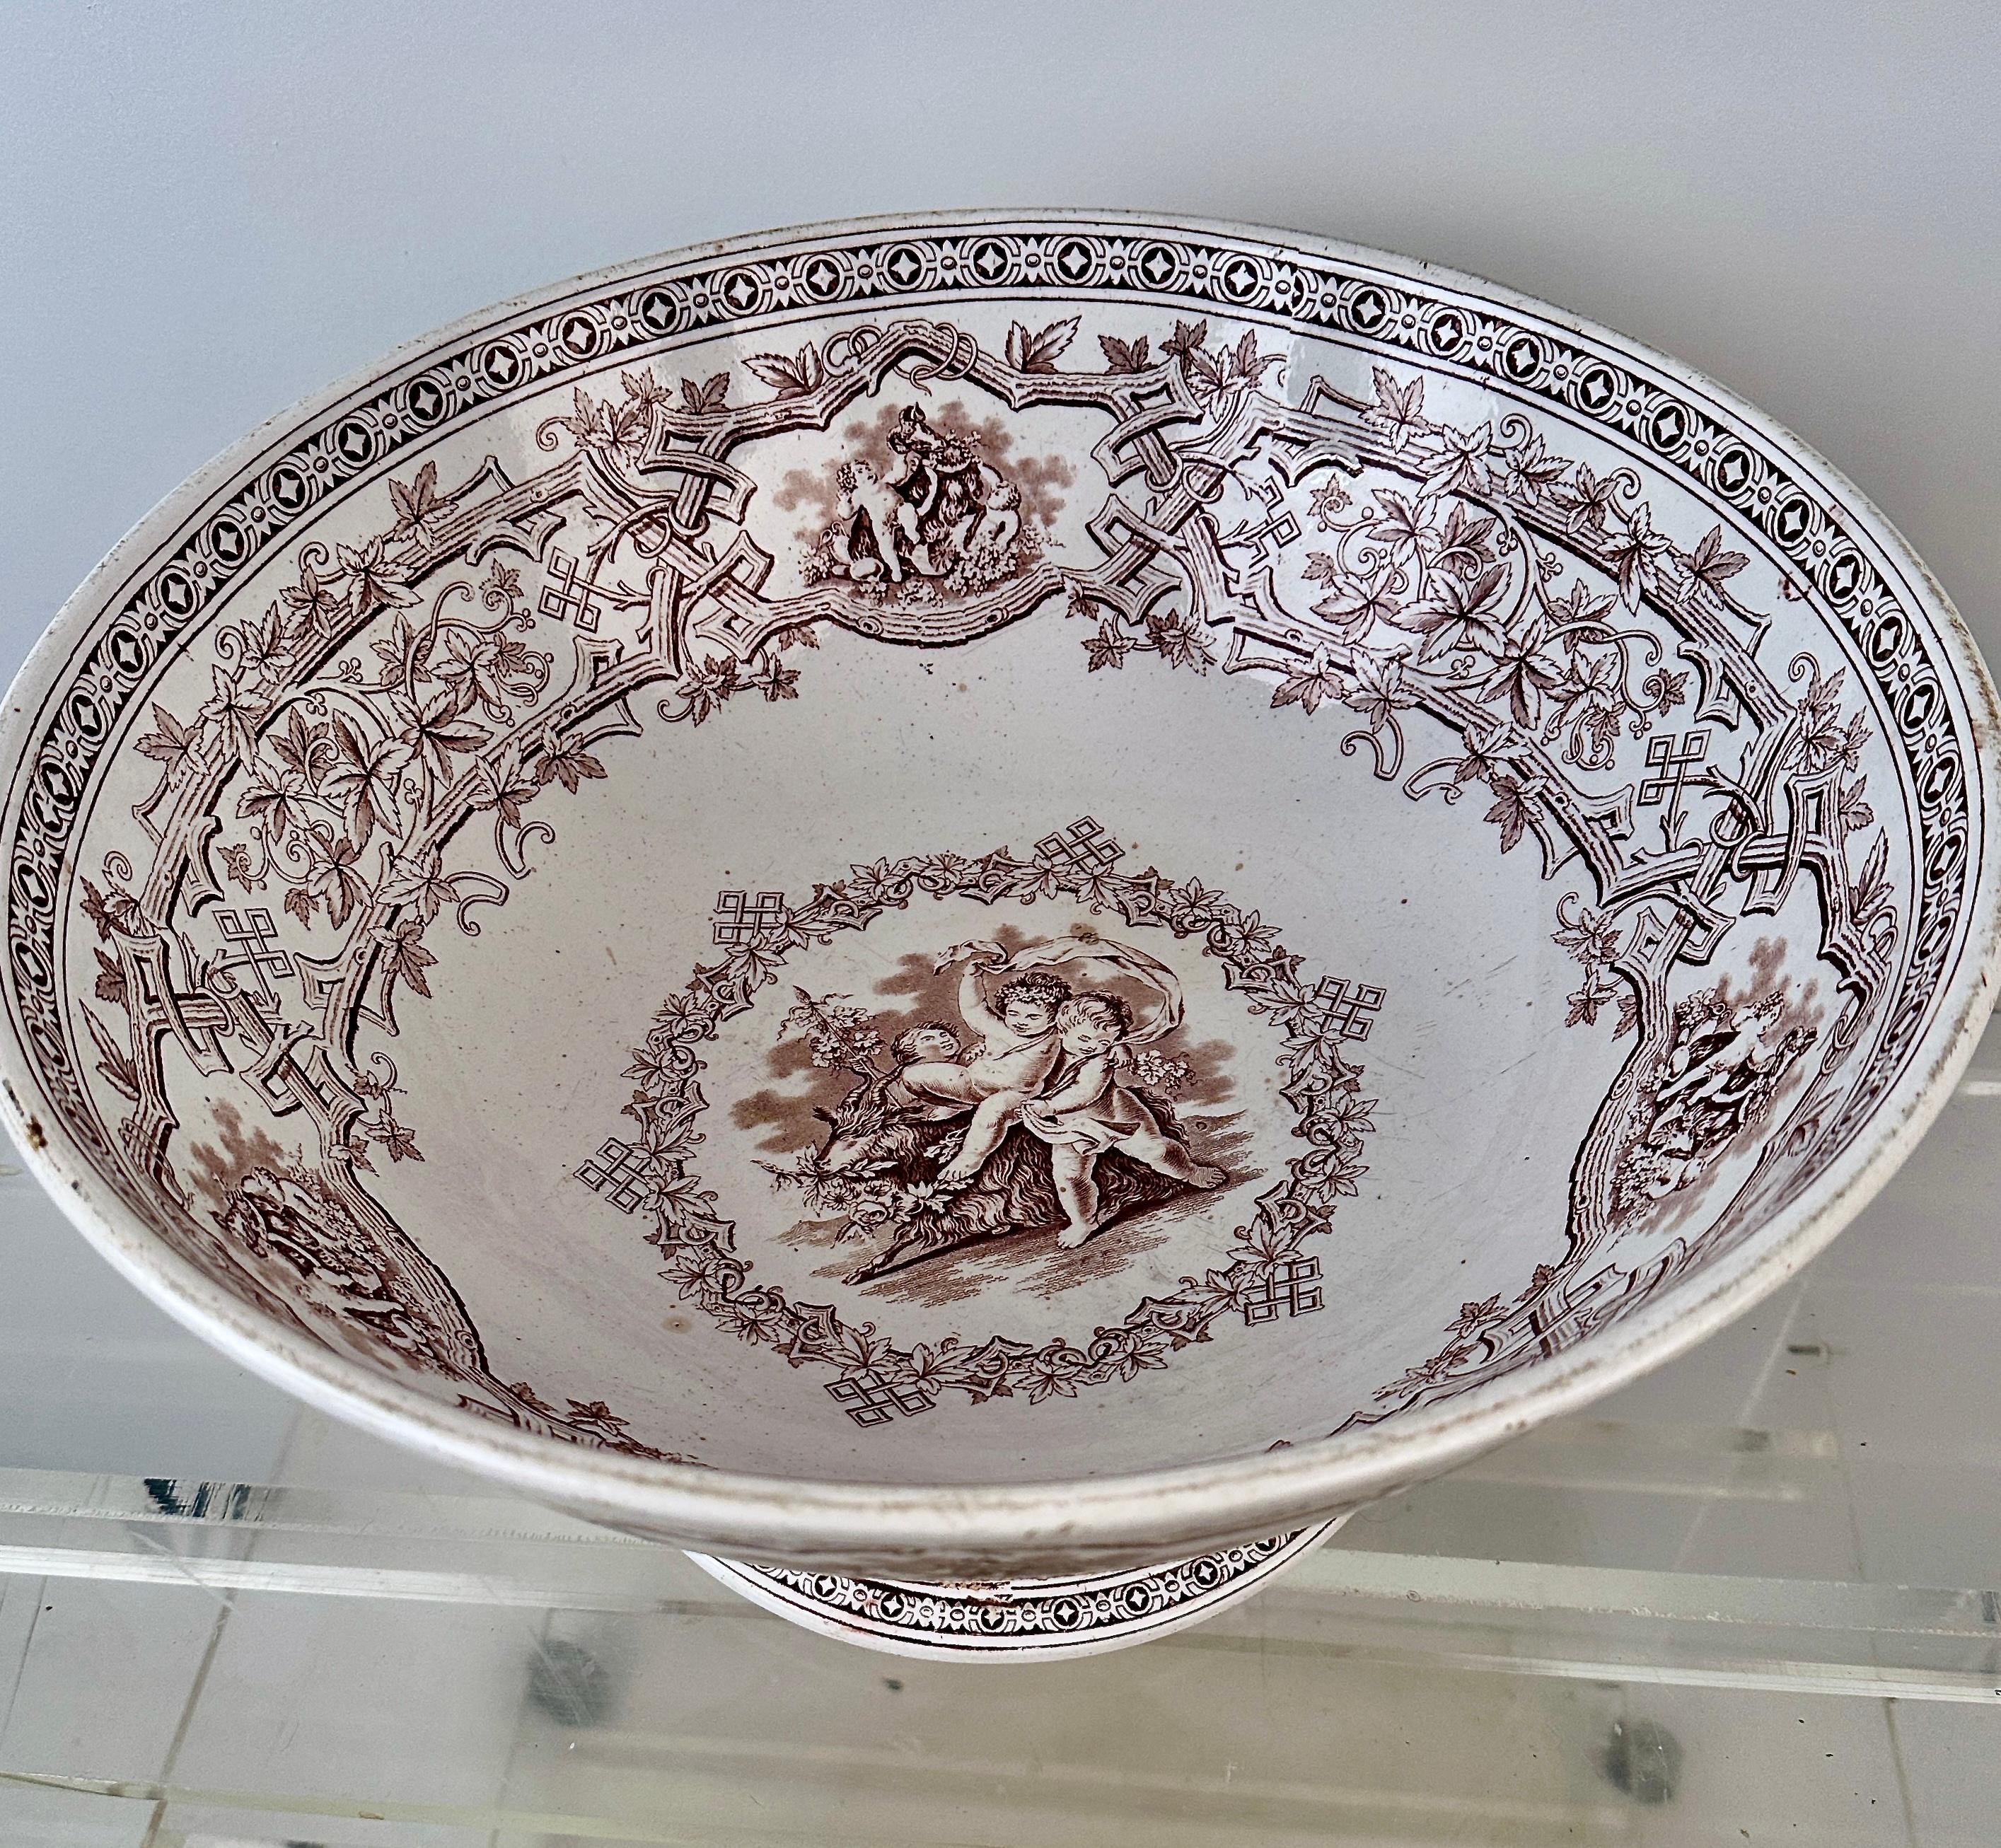 Ceramic !9th C English Transferware Punch Bowl by Furnival For Sale